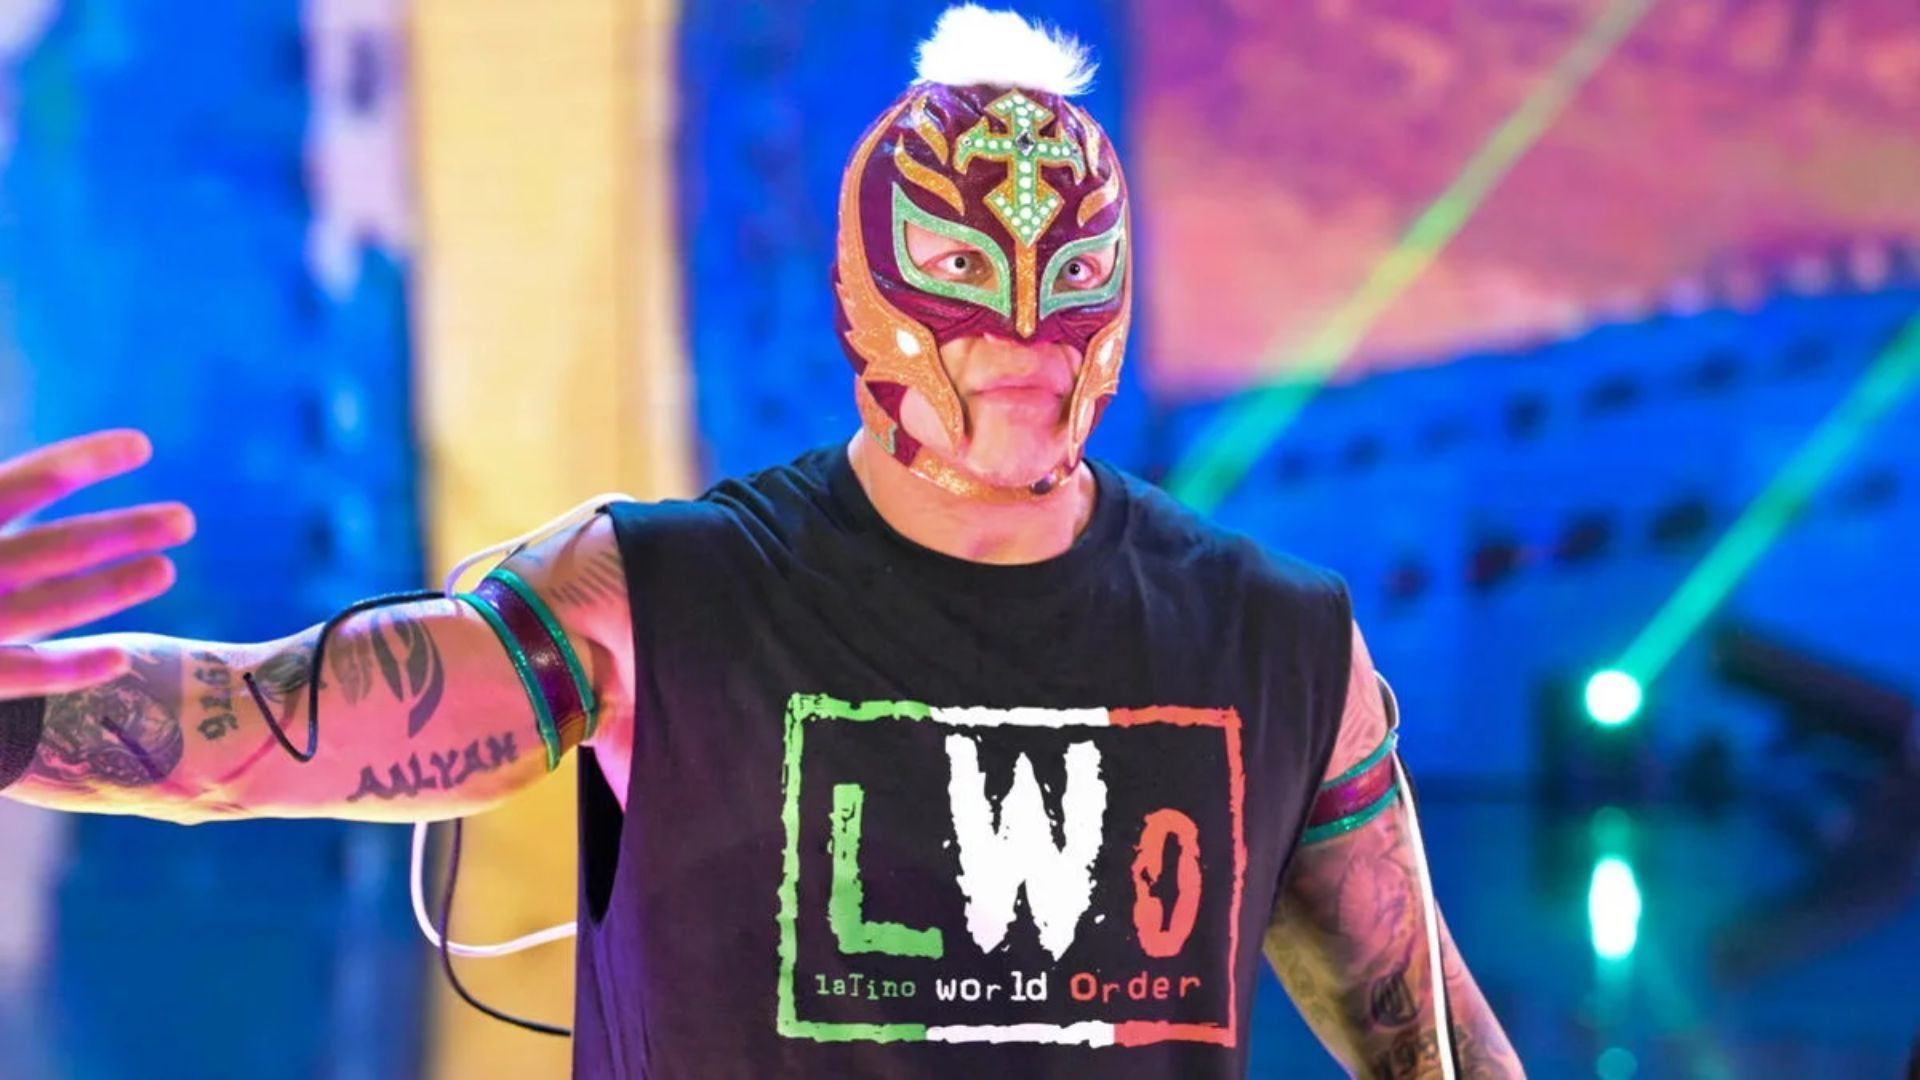 Rey Mysterio during his entrance. Image Credits: wwe.com 